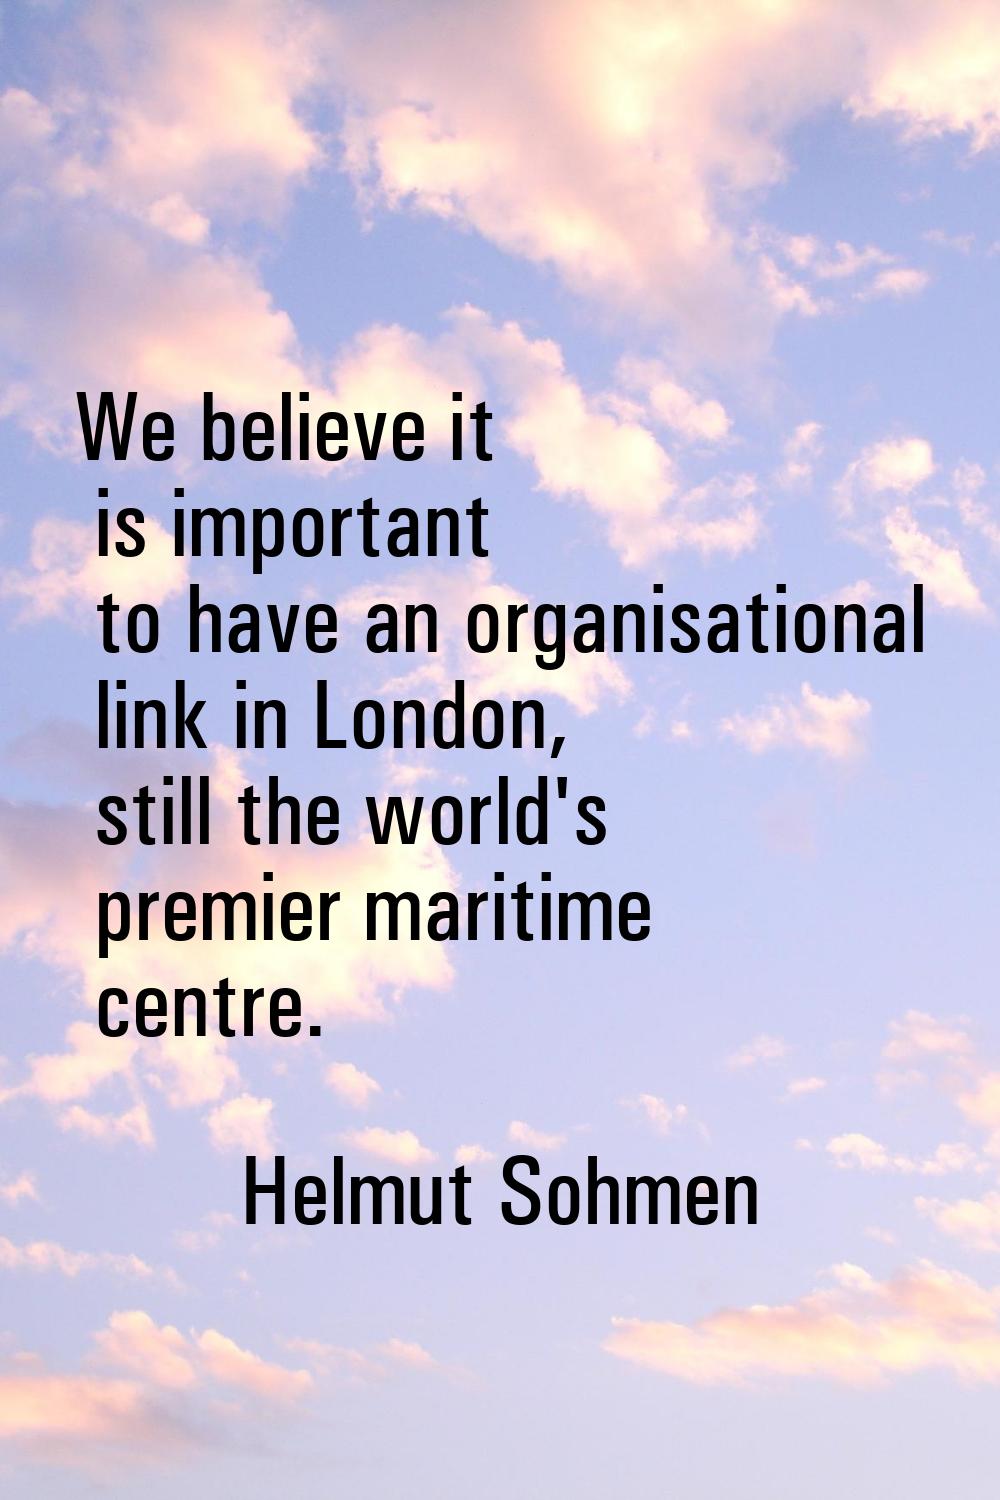 We believe it is important to have an organisational link in London, still the world's premier mari